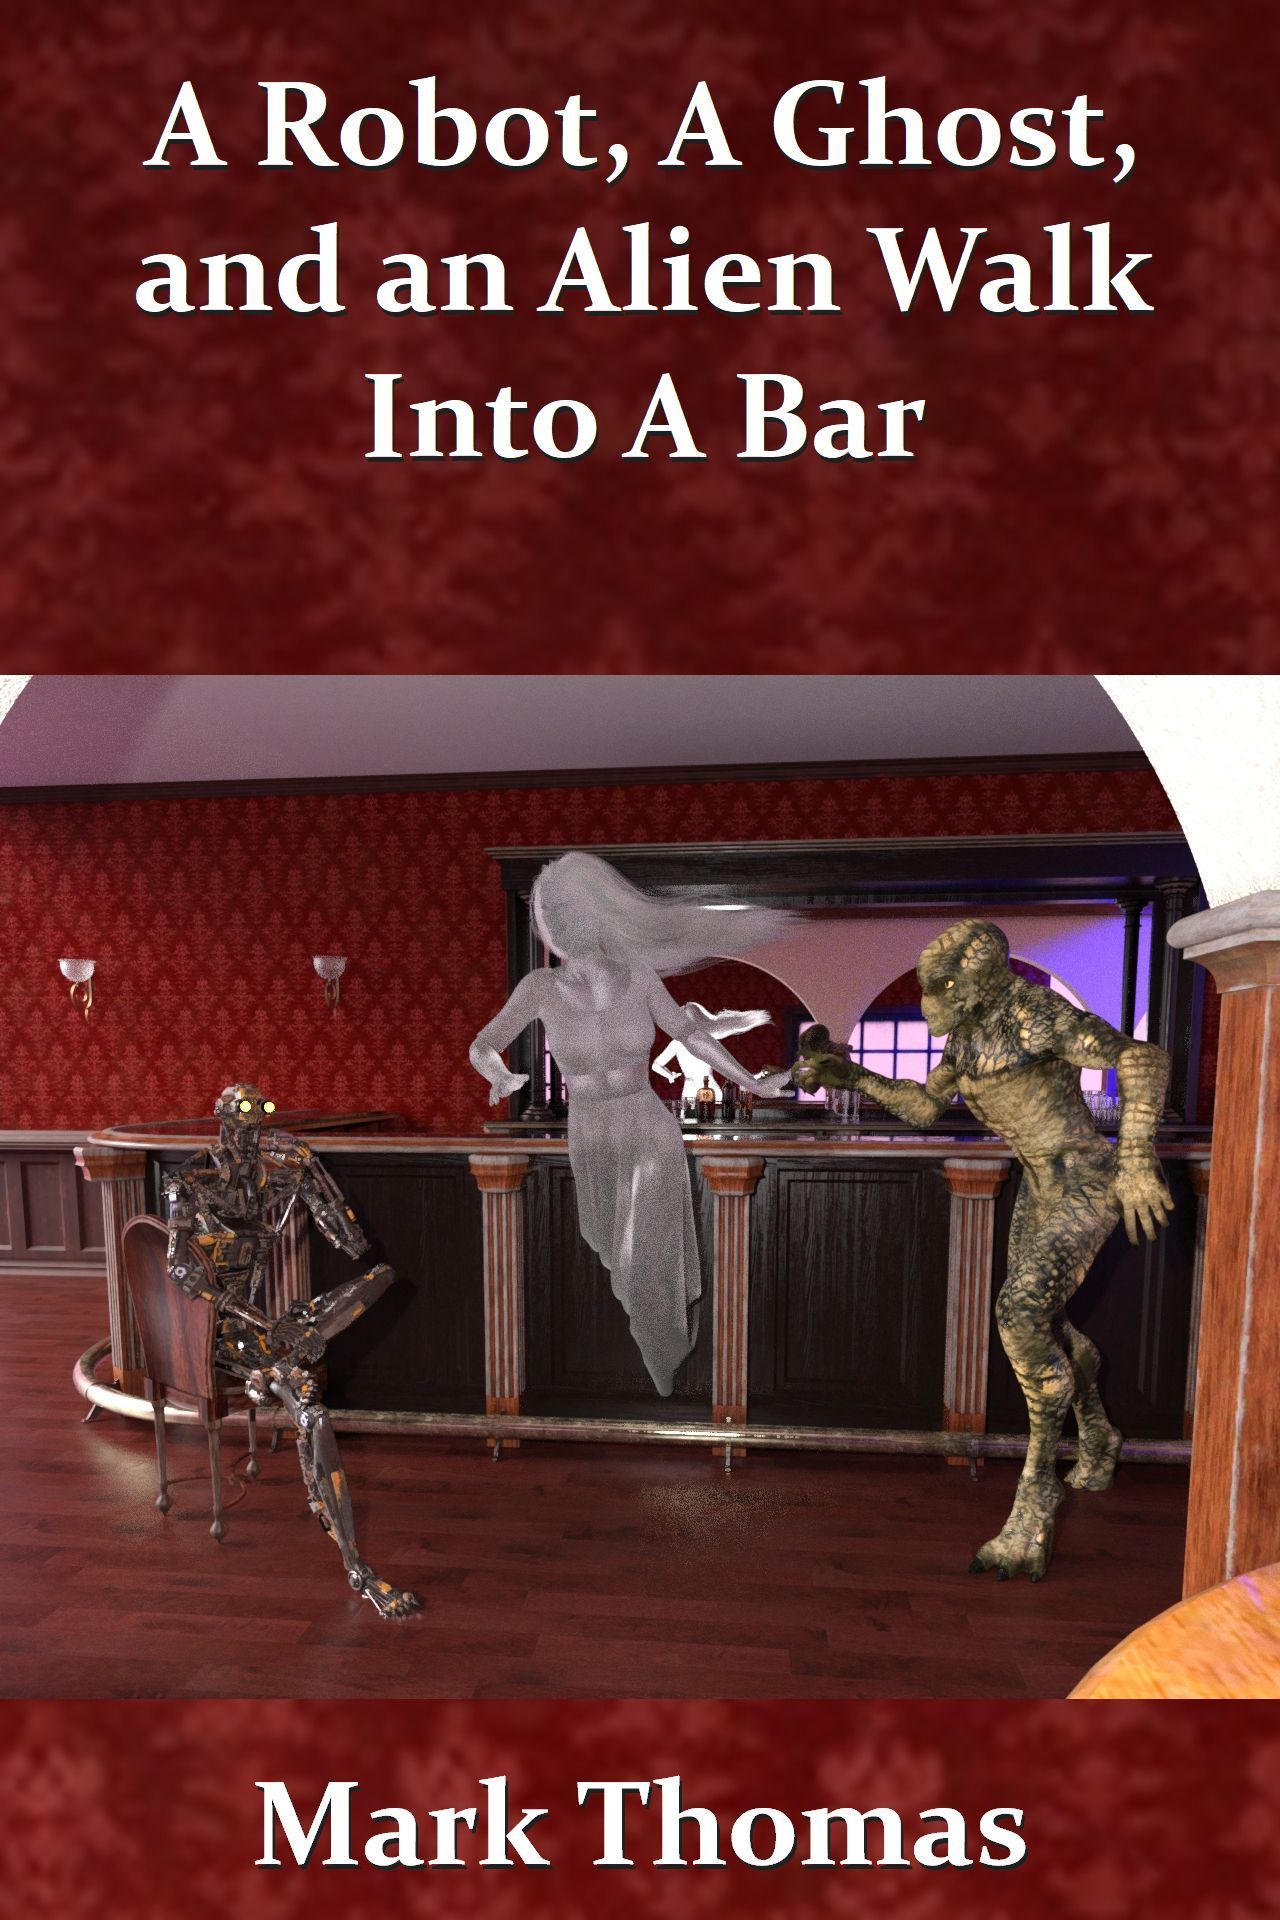 A Robot, A Ghost and An Alien Walk Into A Bar by Mark Thomas